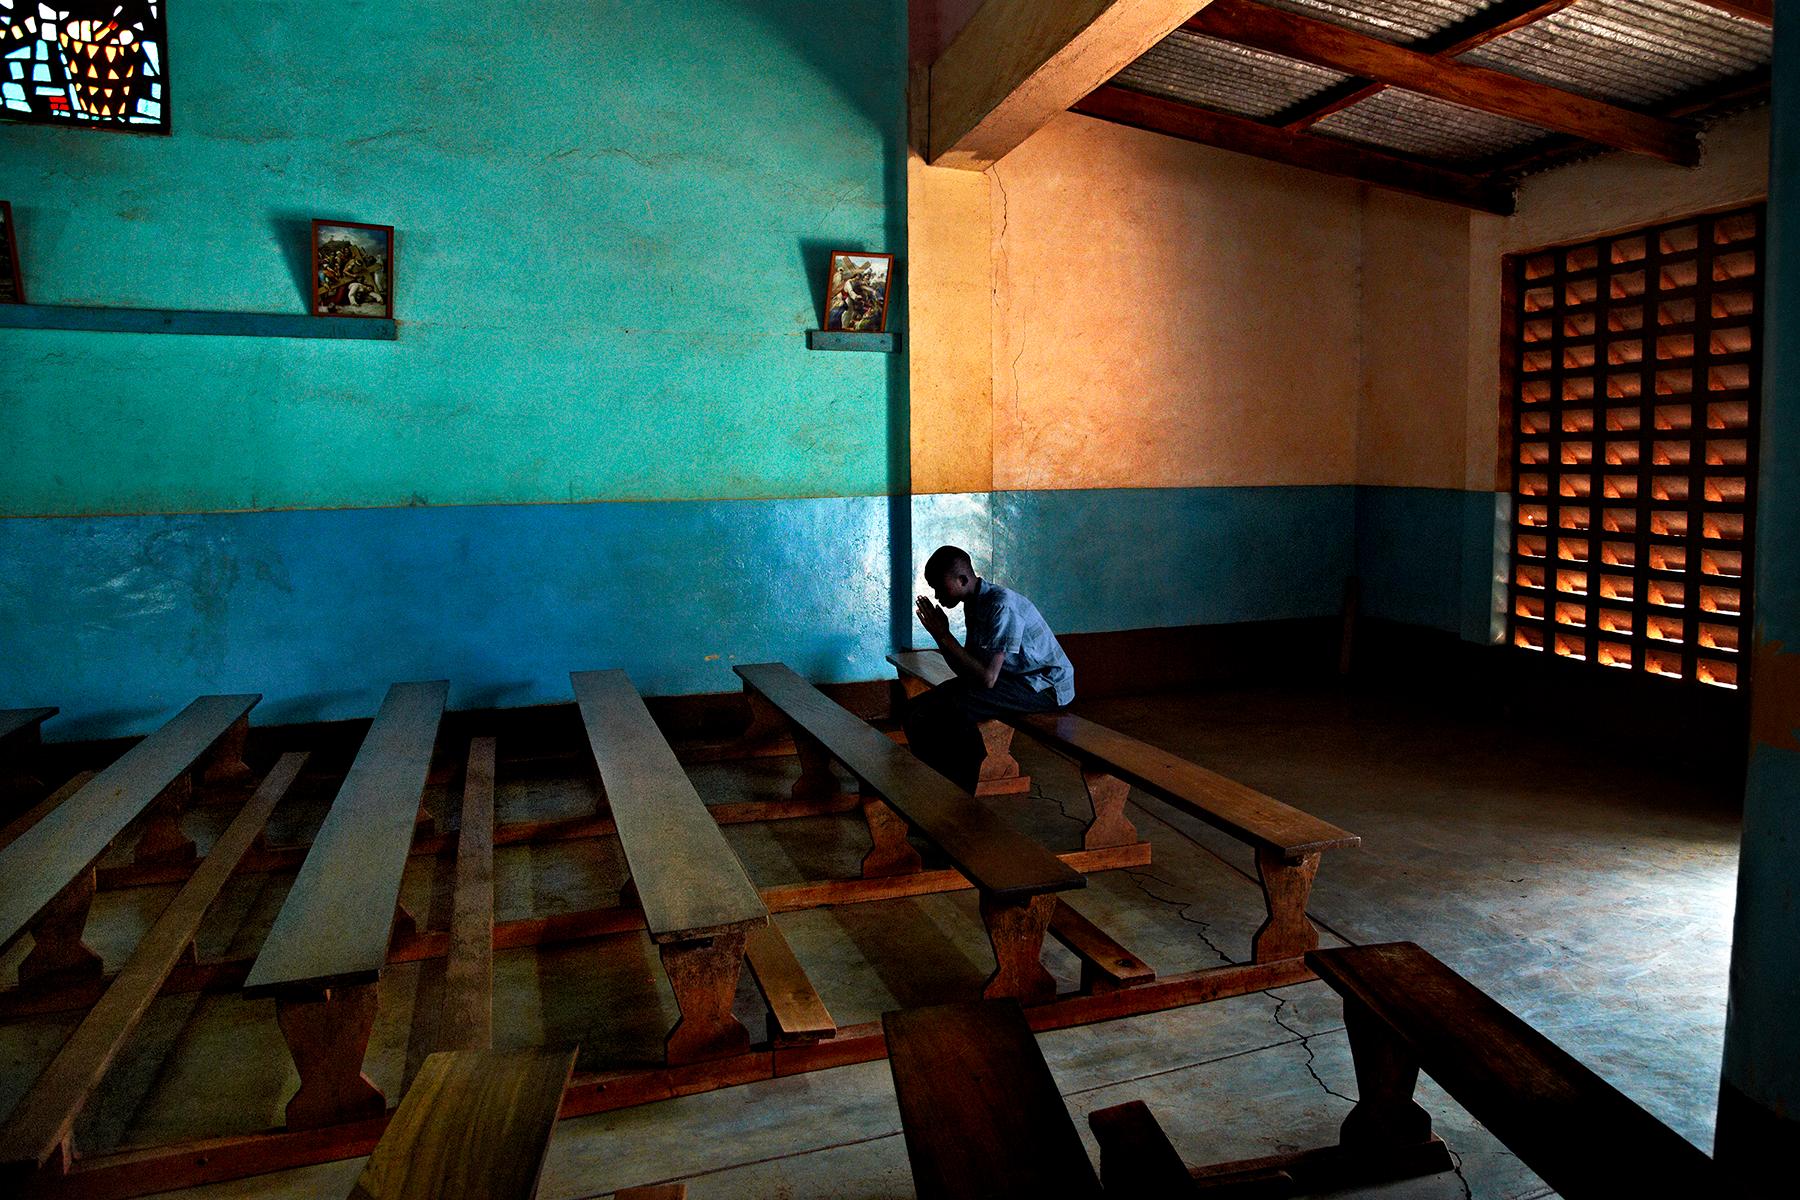 A coffee farmer prays alone in an empty church by Steve McCurry depicts a man sitting by himself on a bench, kneeling over with his hands in prayer. Light pours in from the open door, illuminating the bright blue and orange painted walls. 

This